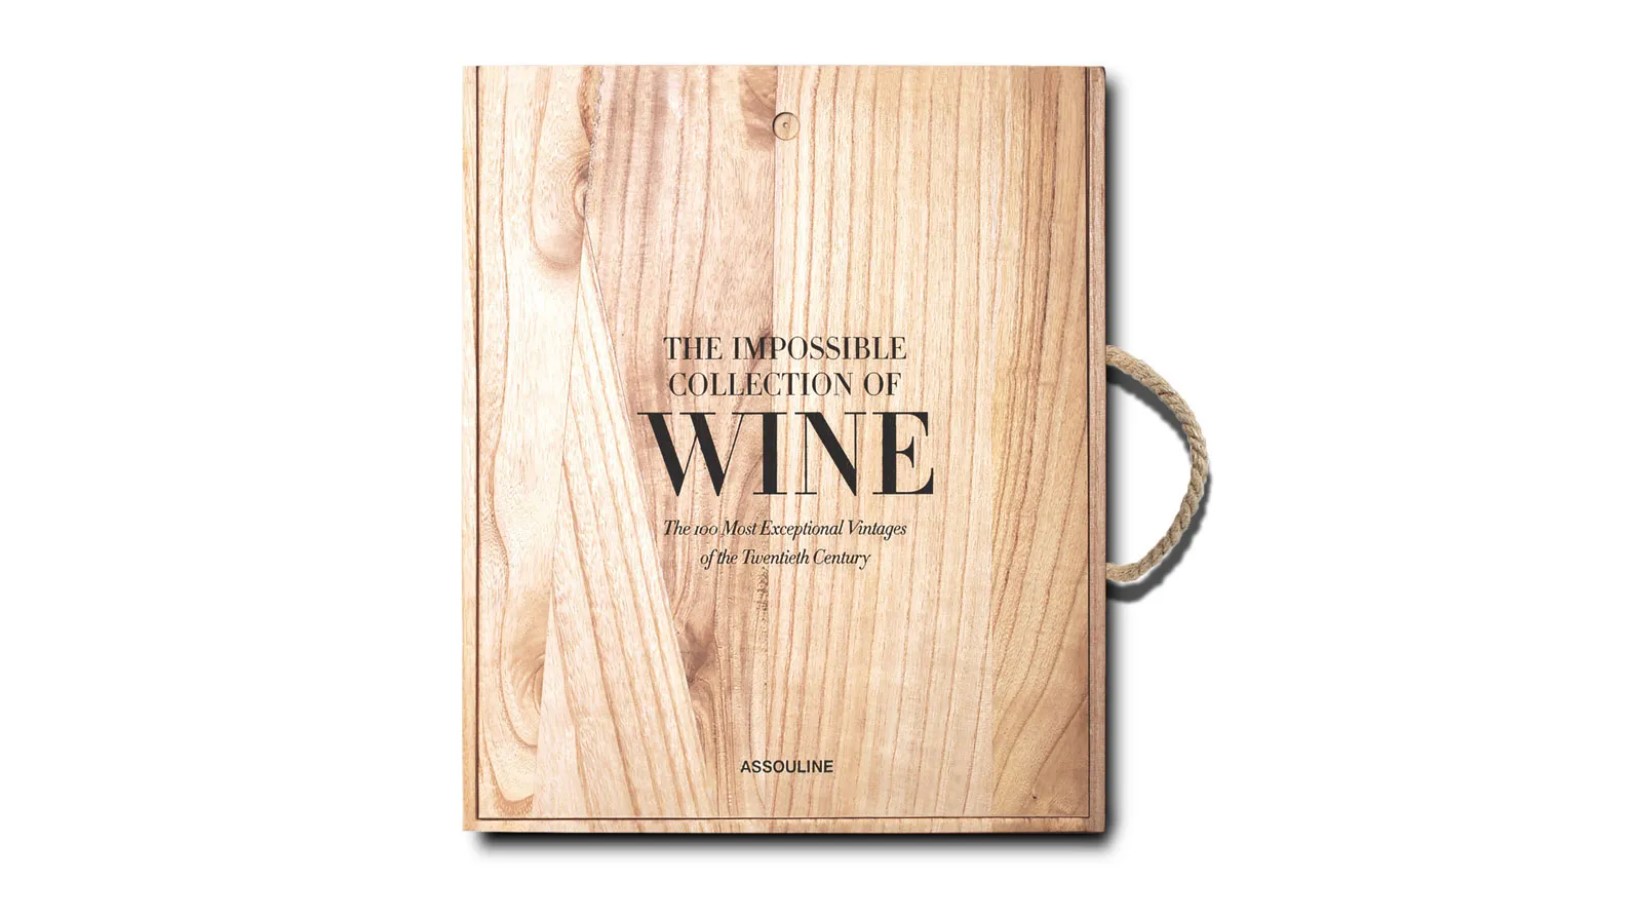 Image of The Impossible Collection of Wine by Enrico Bernardo